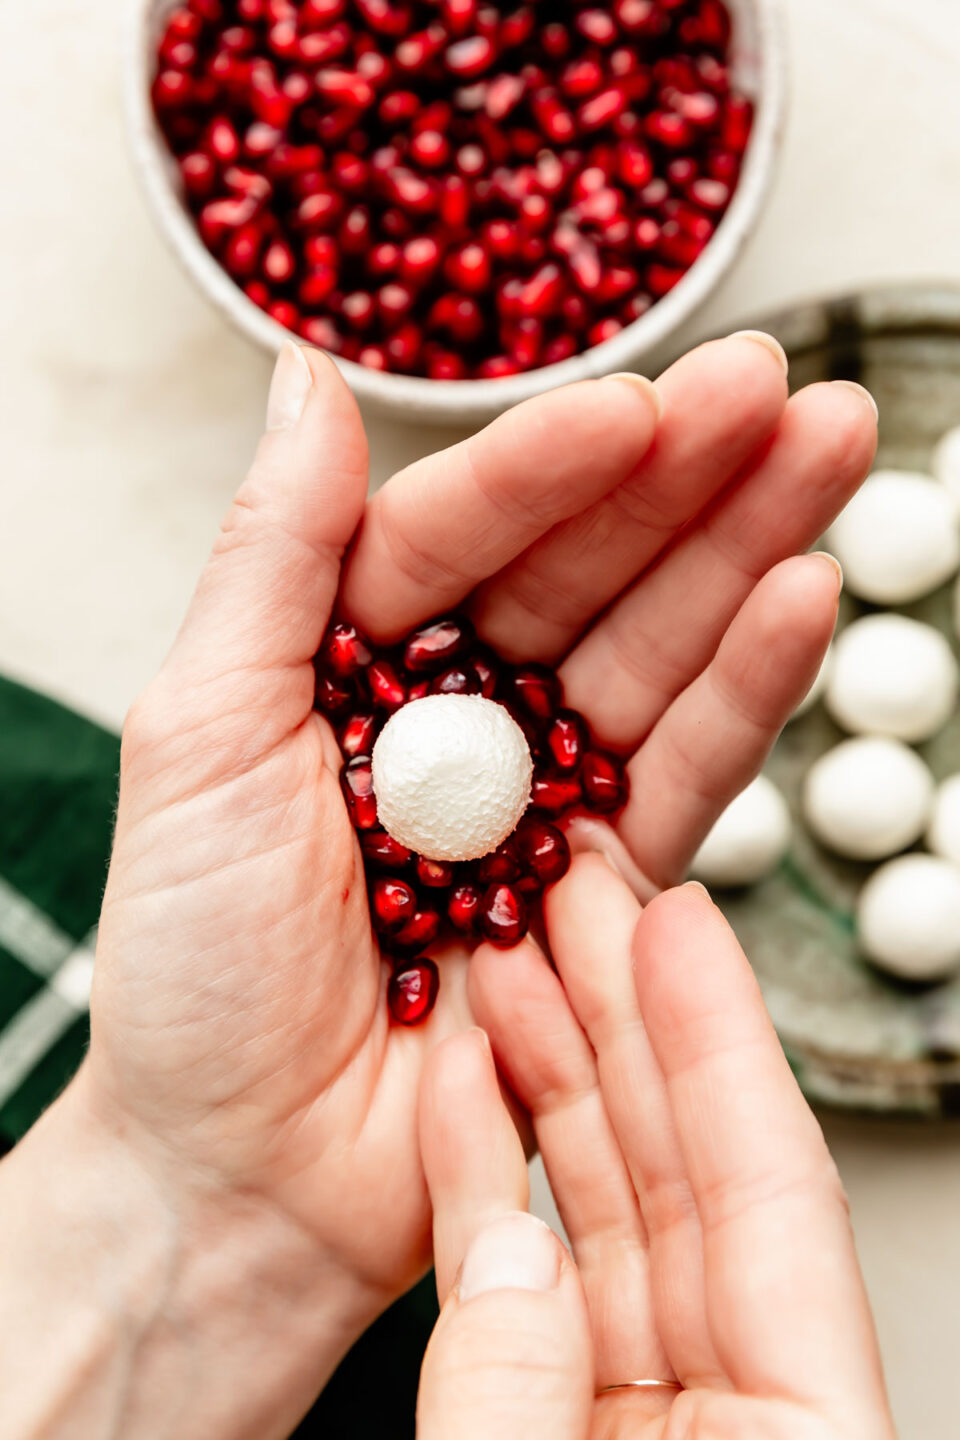 An overhead shot of a woman's hand holding a ball of goat cheese and pomegranate arils, forming a pomegranate goat cheese ornament. A plate of goat cheese balls and a bowl of pomegranate arils sits in the background.